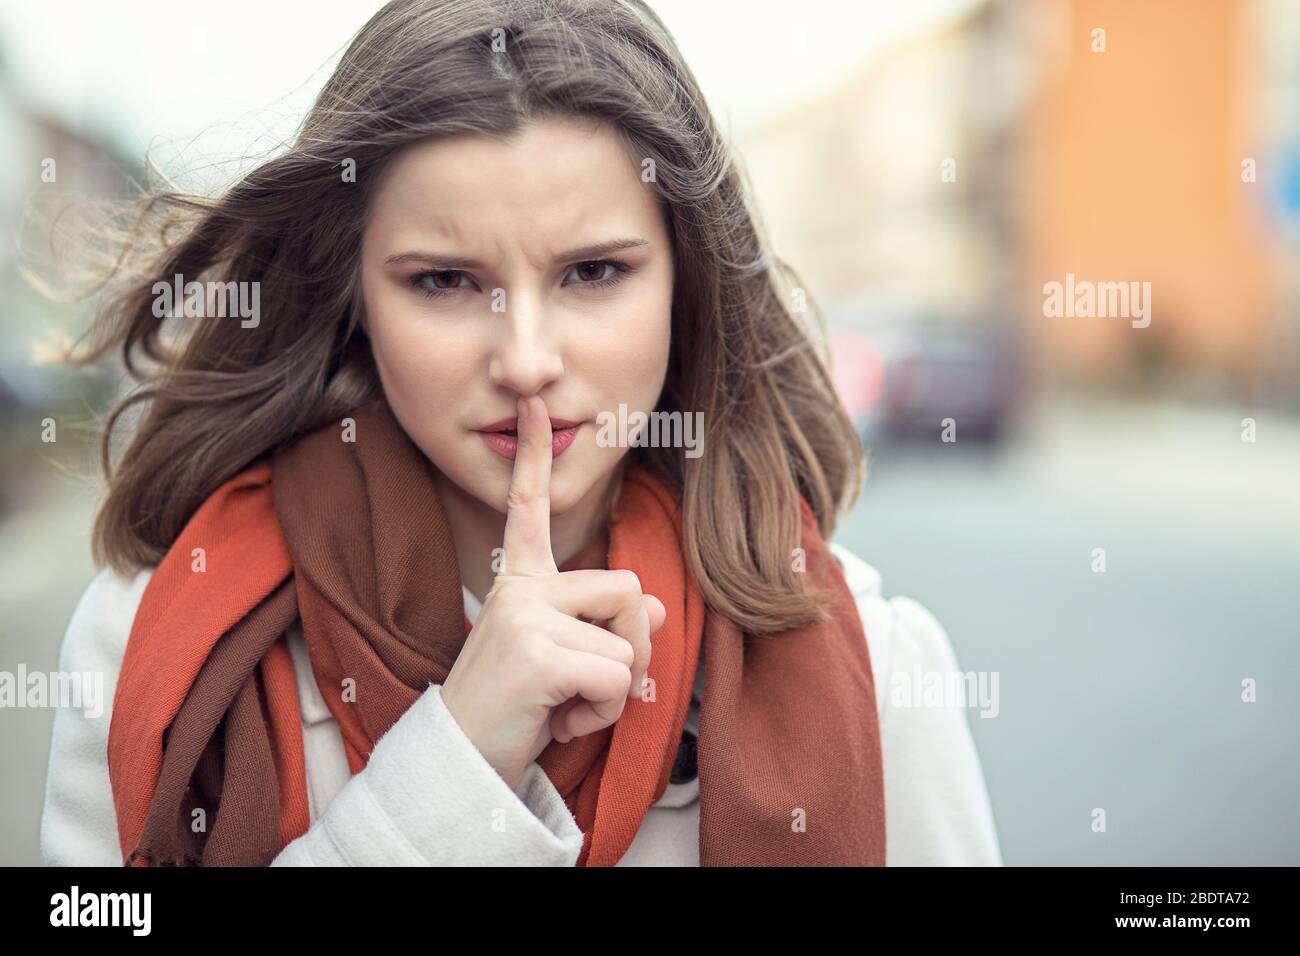 Shh Woman wide eyed asking for silence or secrecy with finger on lips hush hand gesture cityscape outdoor background Pretty girl placing fingers on li Stock Photo